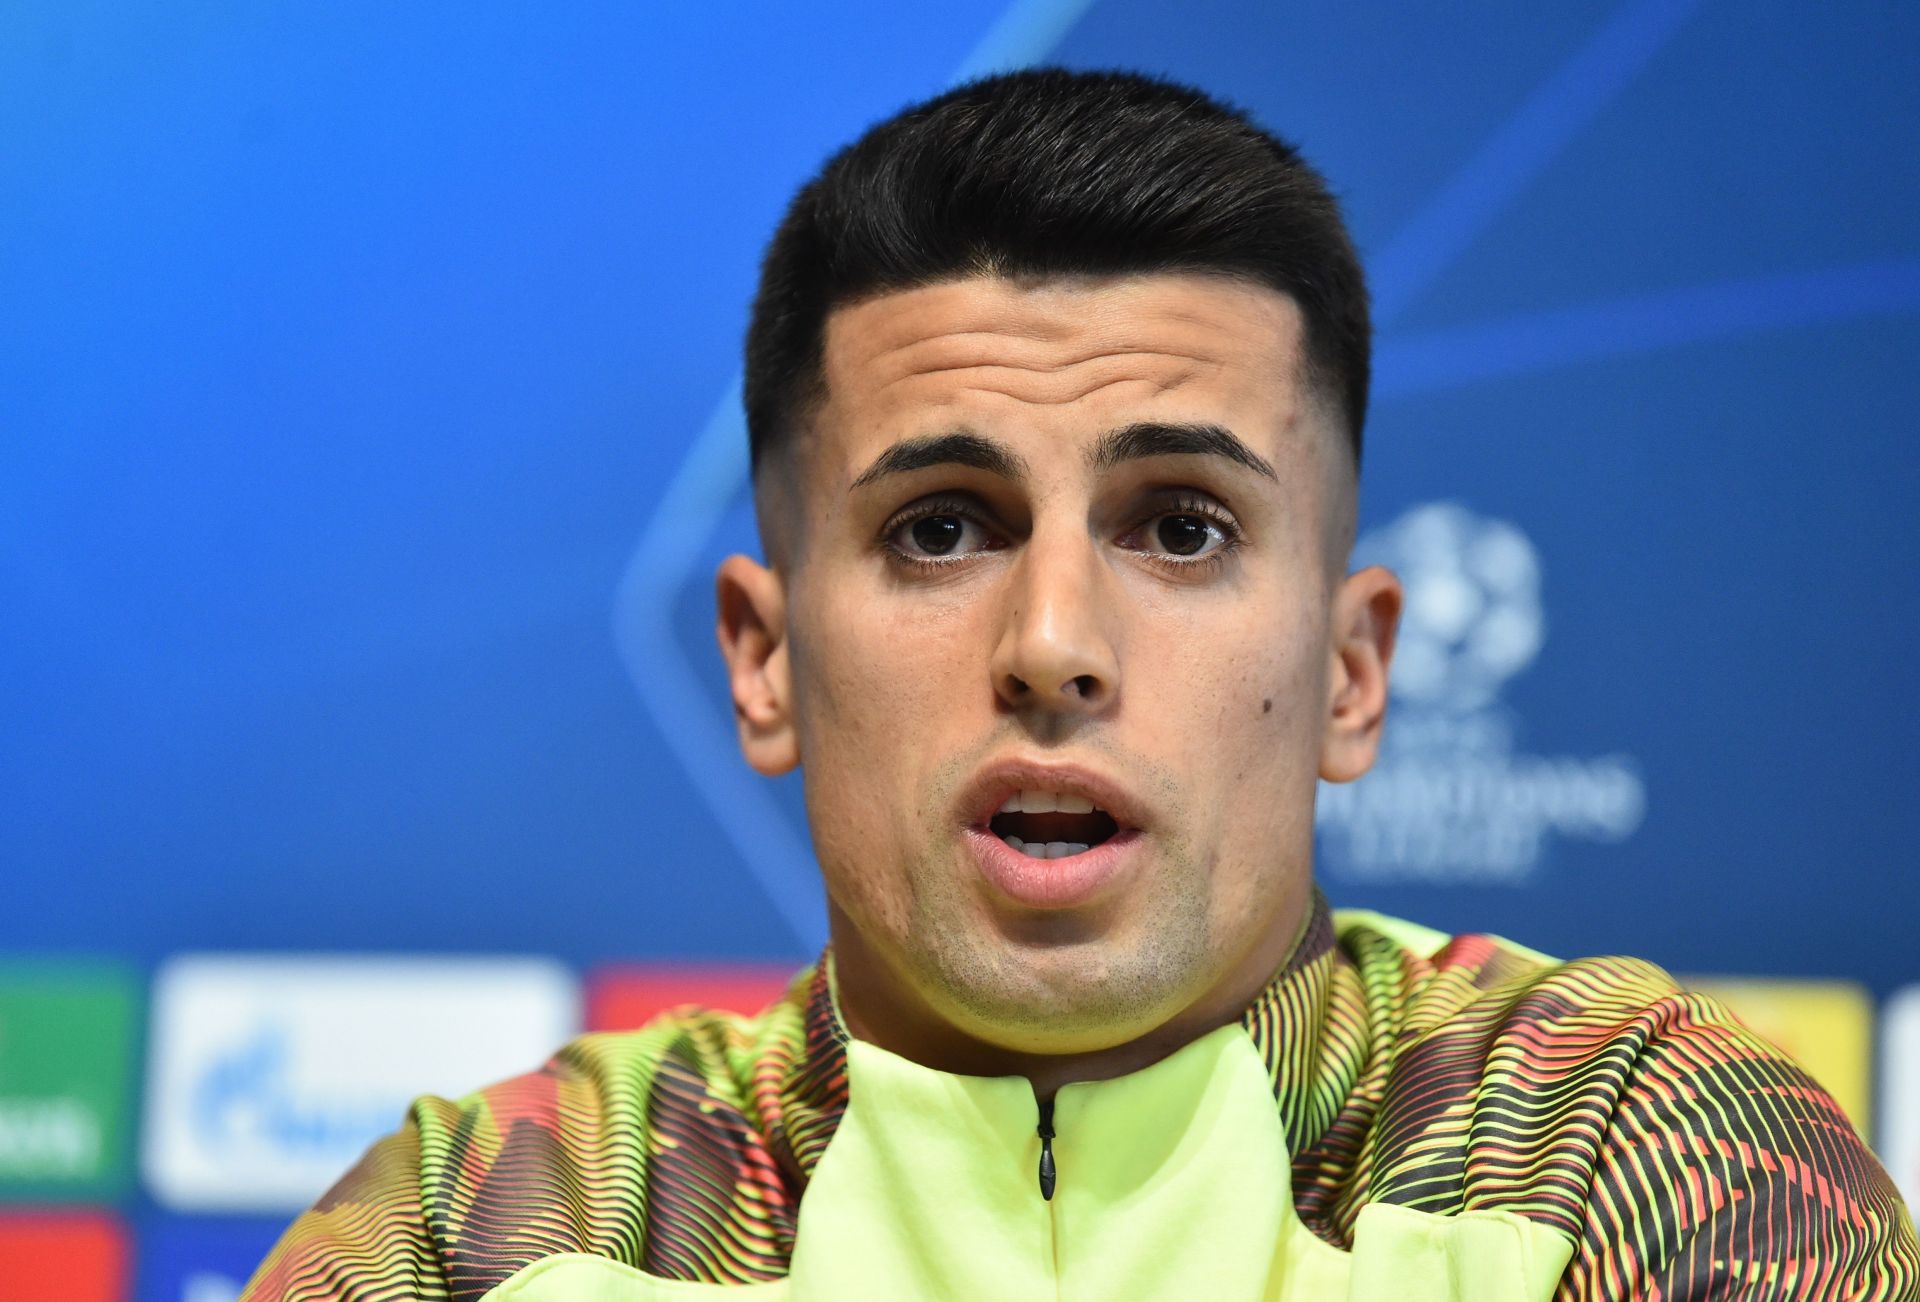 Joao Cancelo could be headed to the Camp Nou.